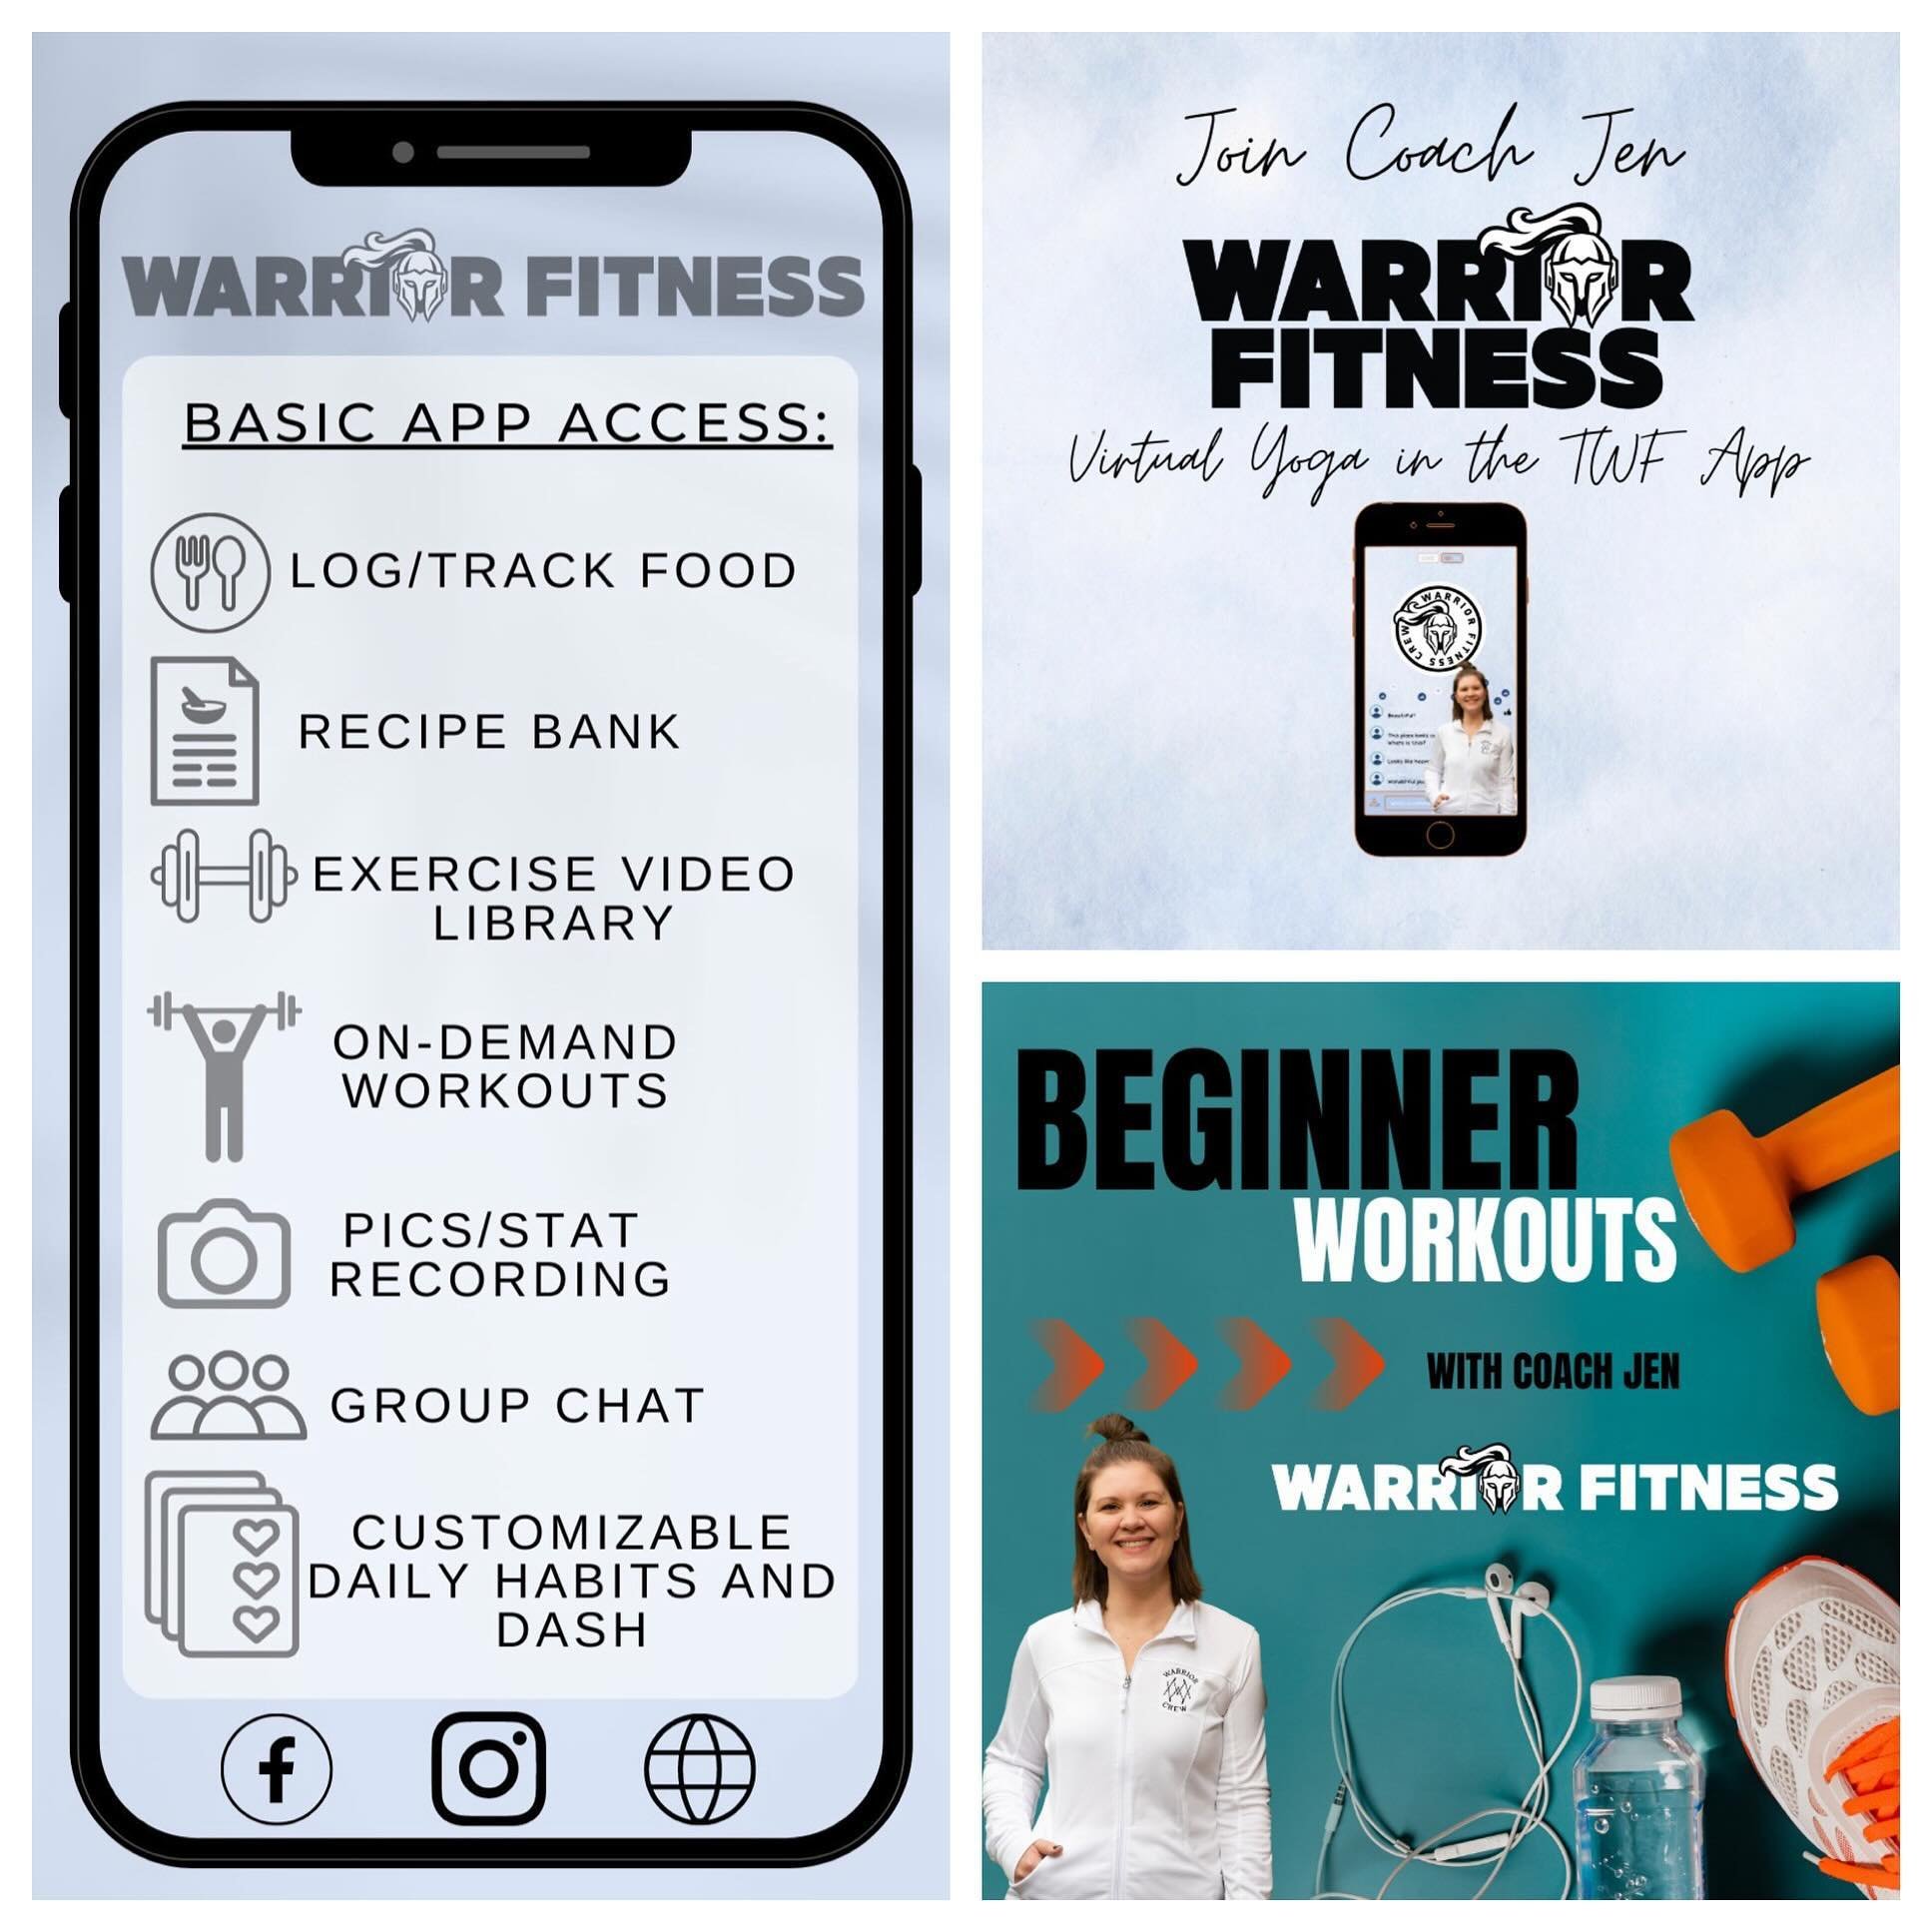 Work with me in the Team Warrior Fitness app! Sign up for basic access (only $9.99/mo!) and you get so many awesome features! 
This is partly how I work with my 1-on-1 clients as well. So, if you&rsquo;re looking for that 1-stop-shop for health/welln